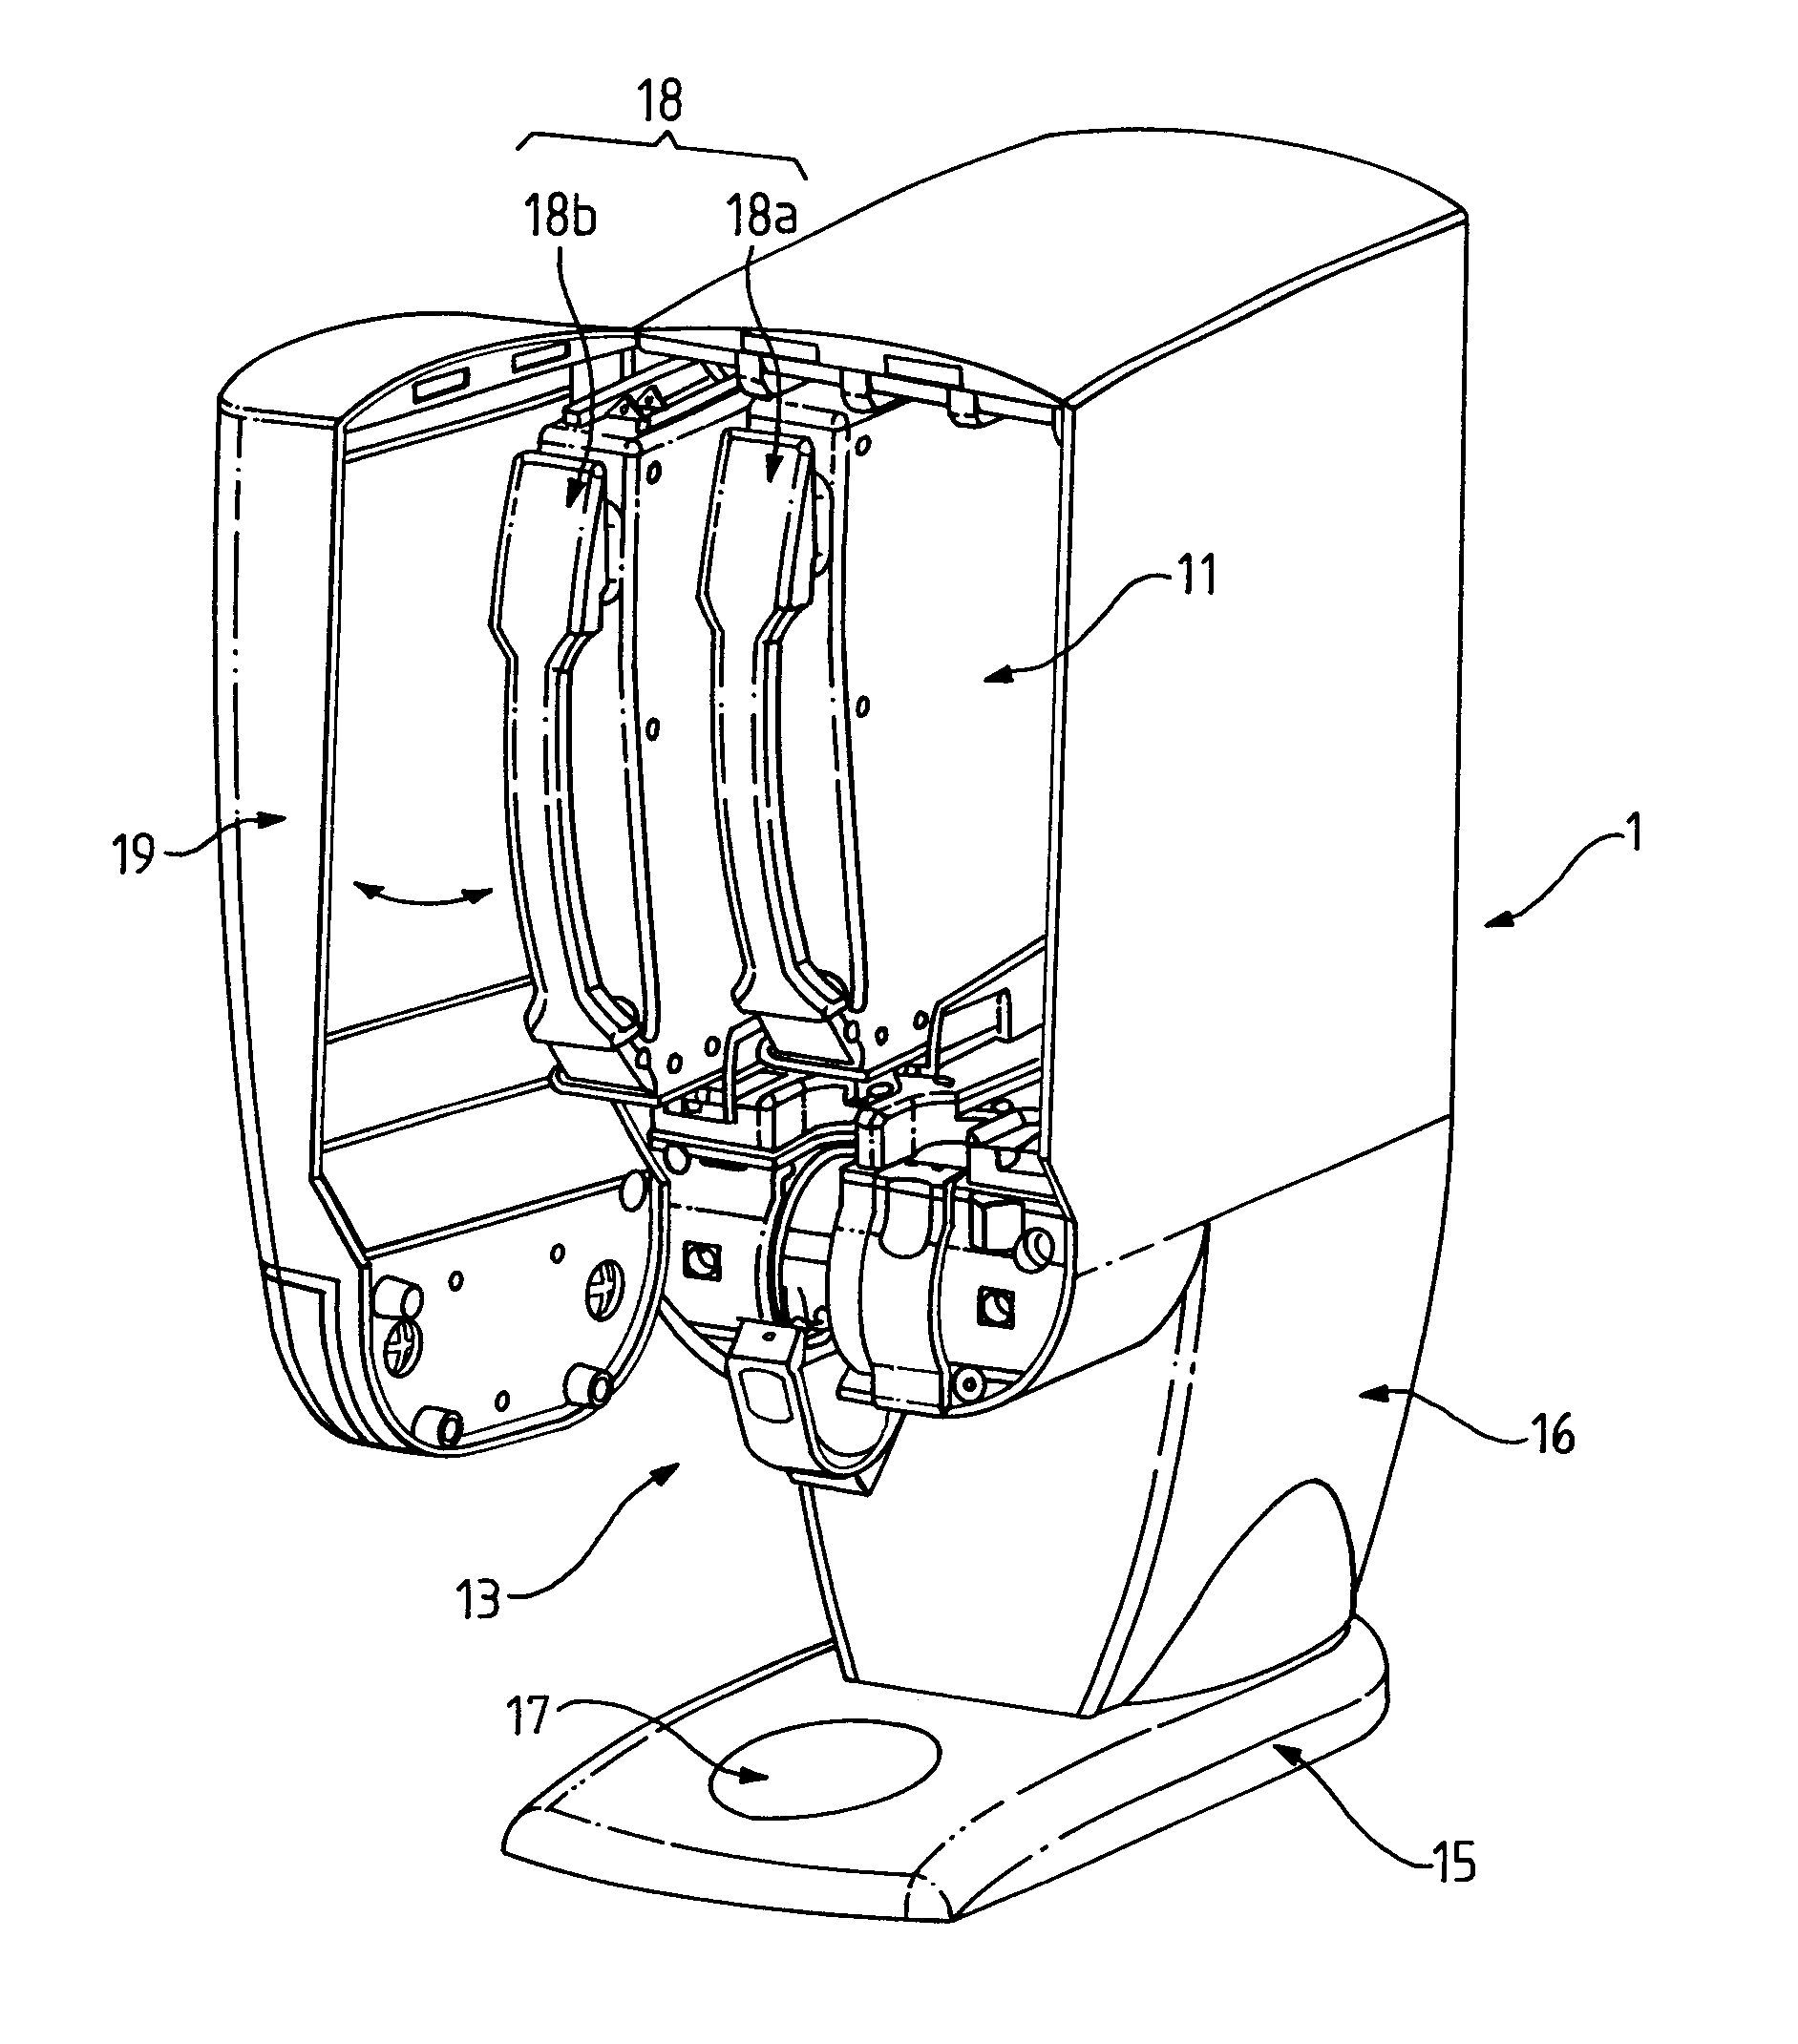 Compartmentalized dispensing device and method for dispensing a flowable product therefrom